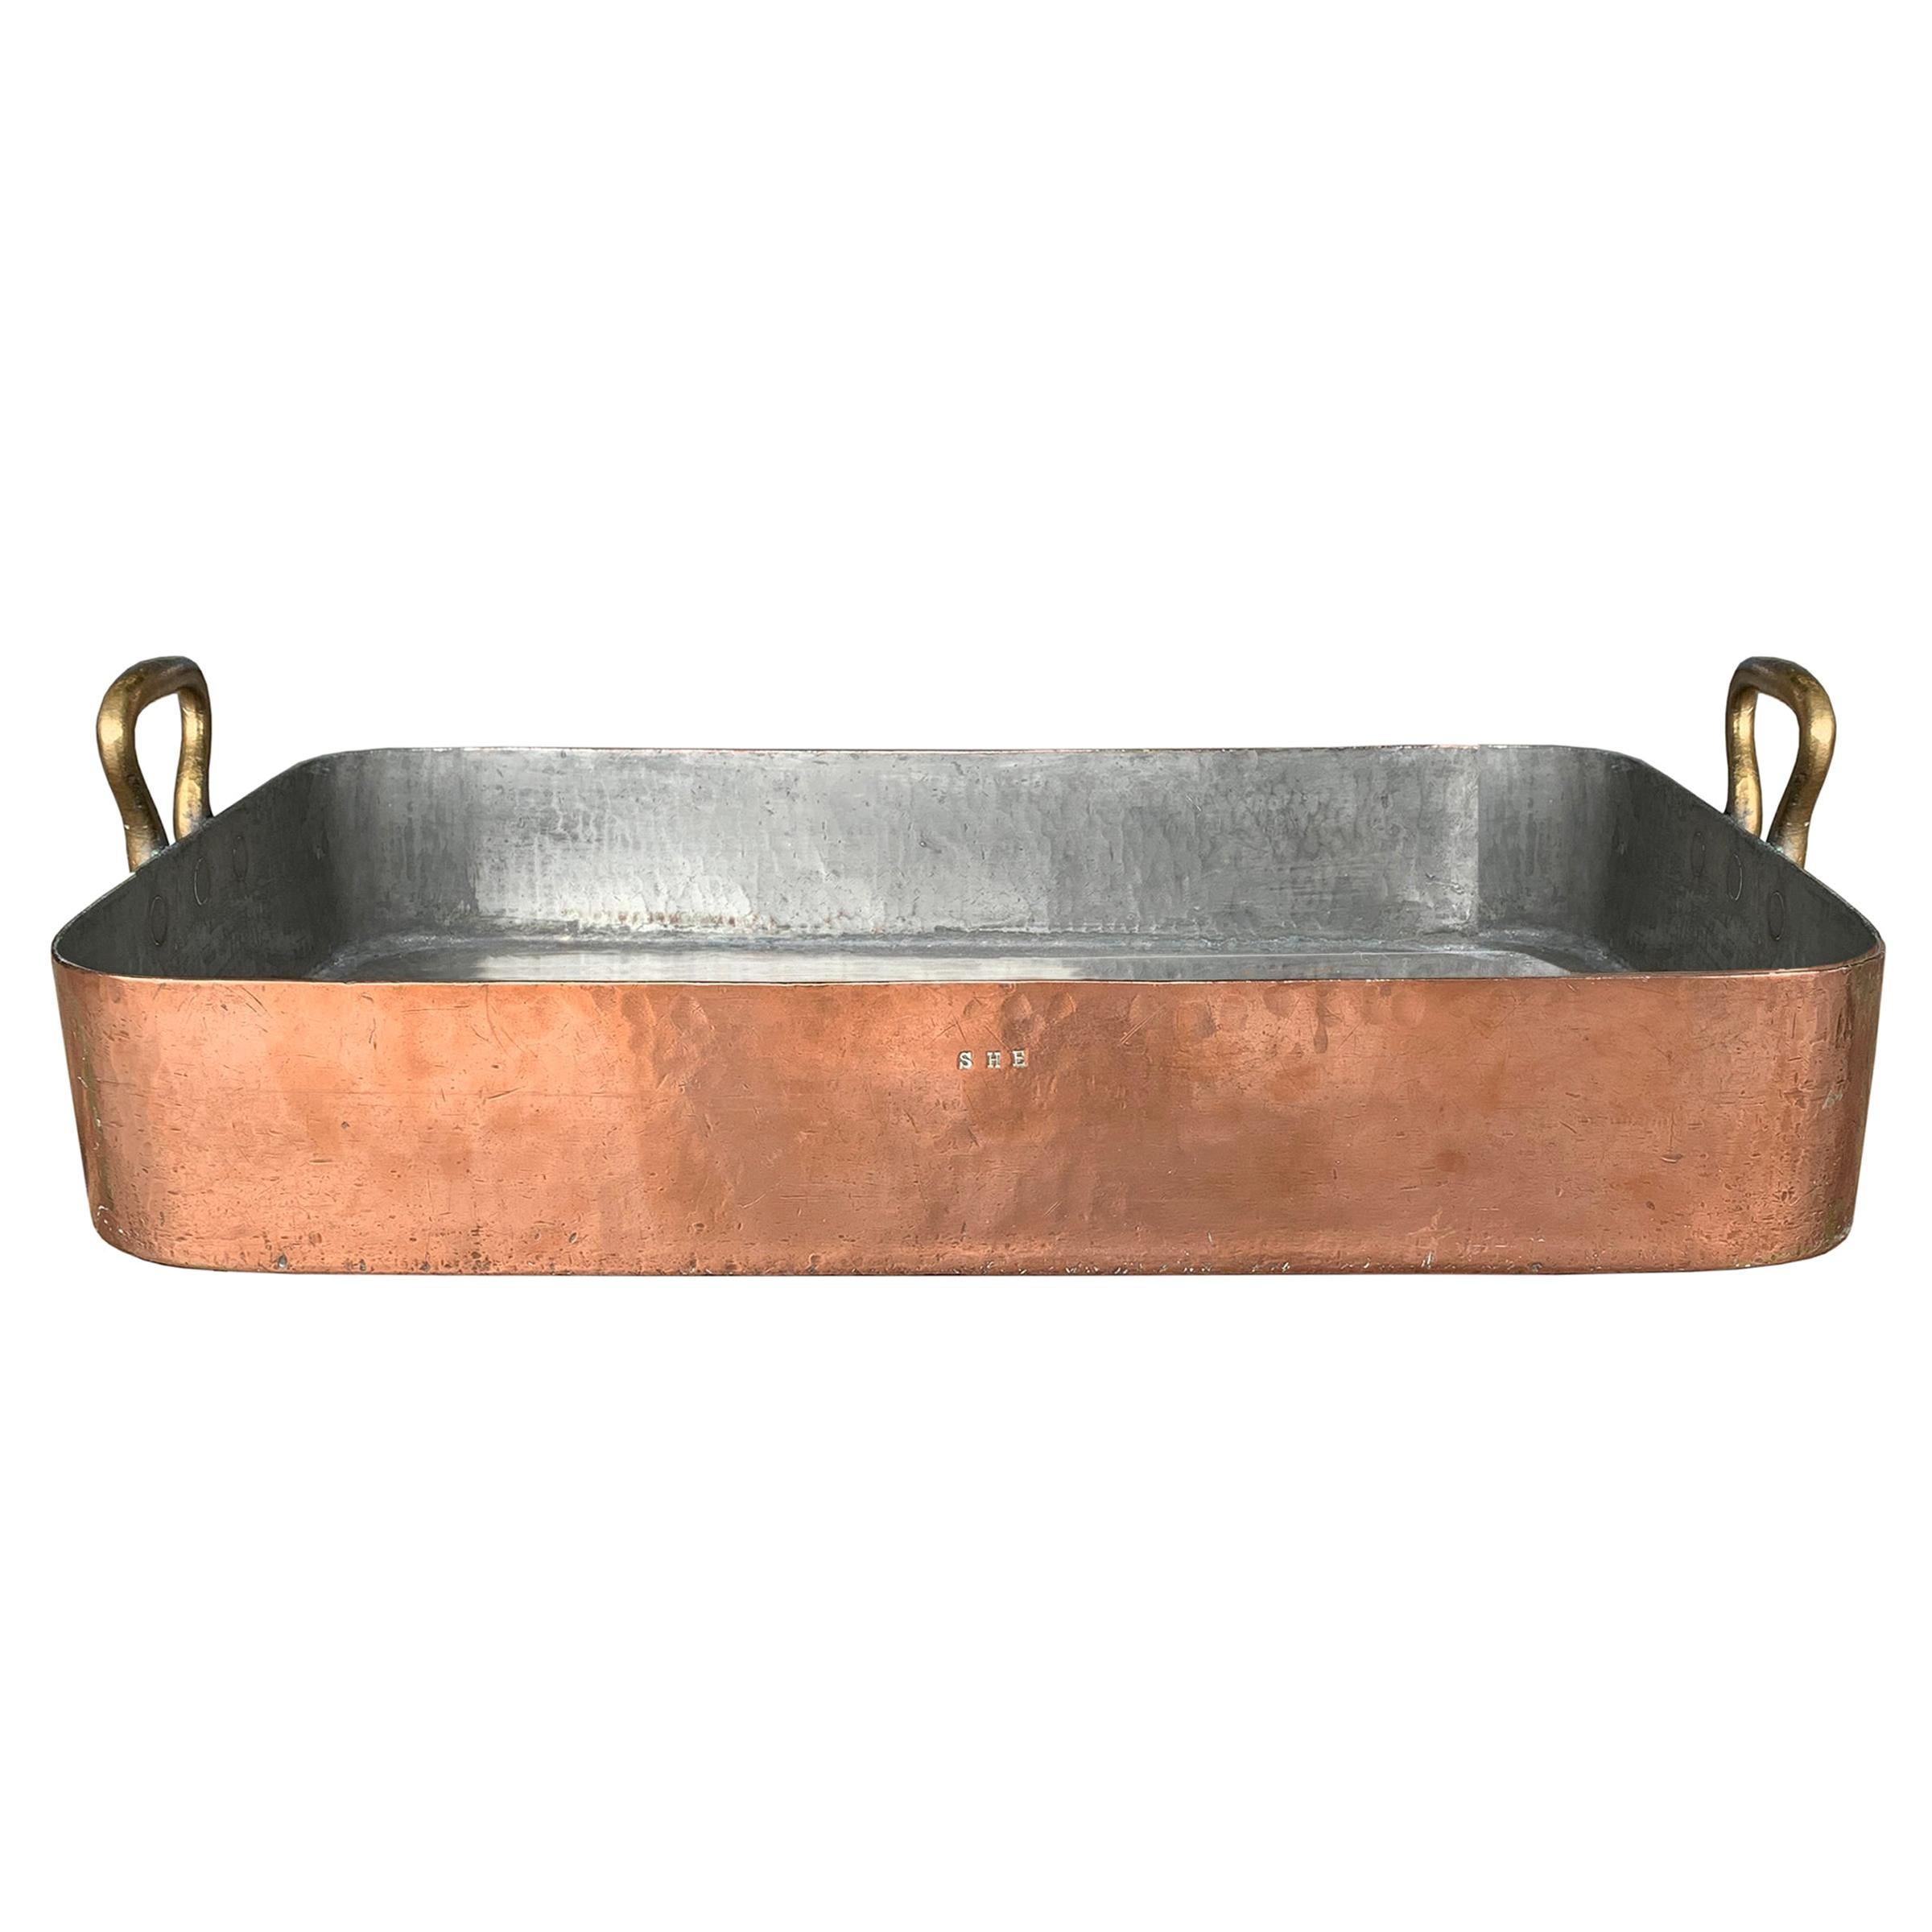 Early 20th Century French Copper Roaster